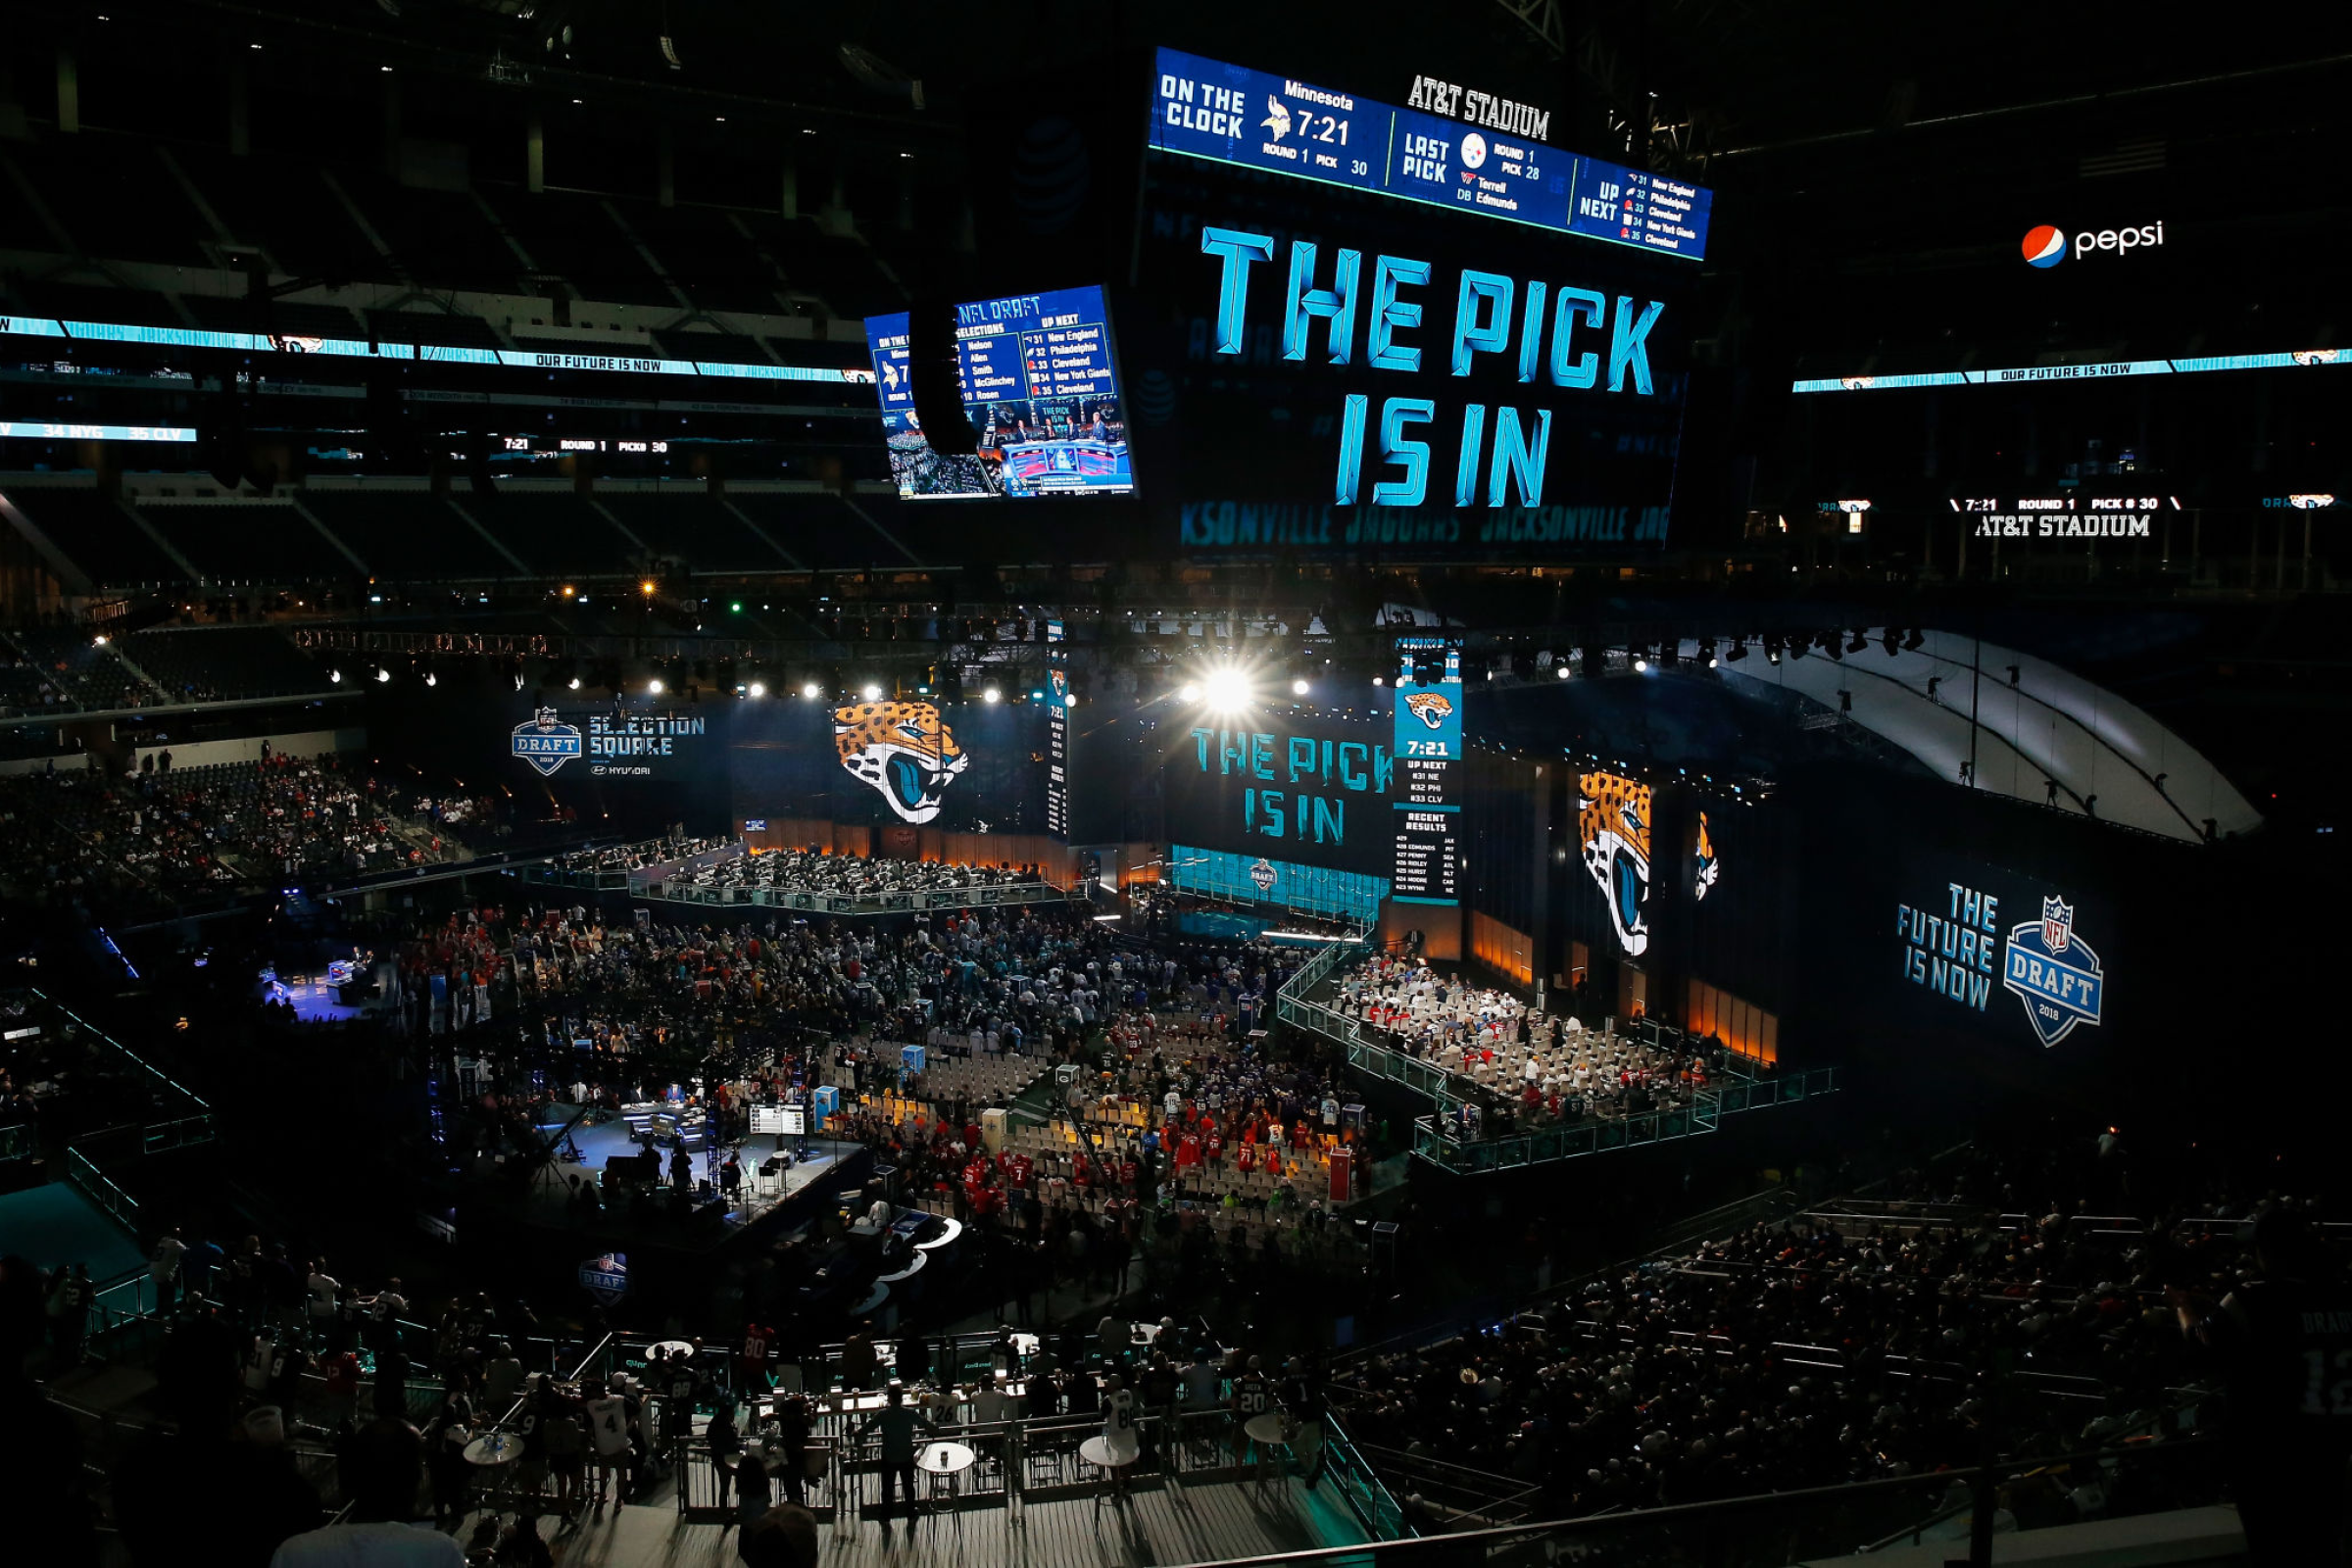 A video board at AT&T Stadium in Arlington, Texas, displays "The pick is in" for the Jacksonville Jaguars at the 2018 draft.